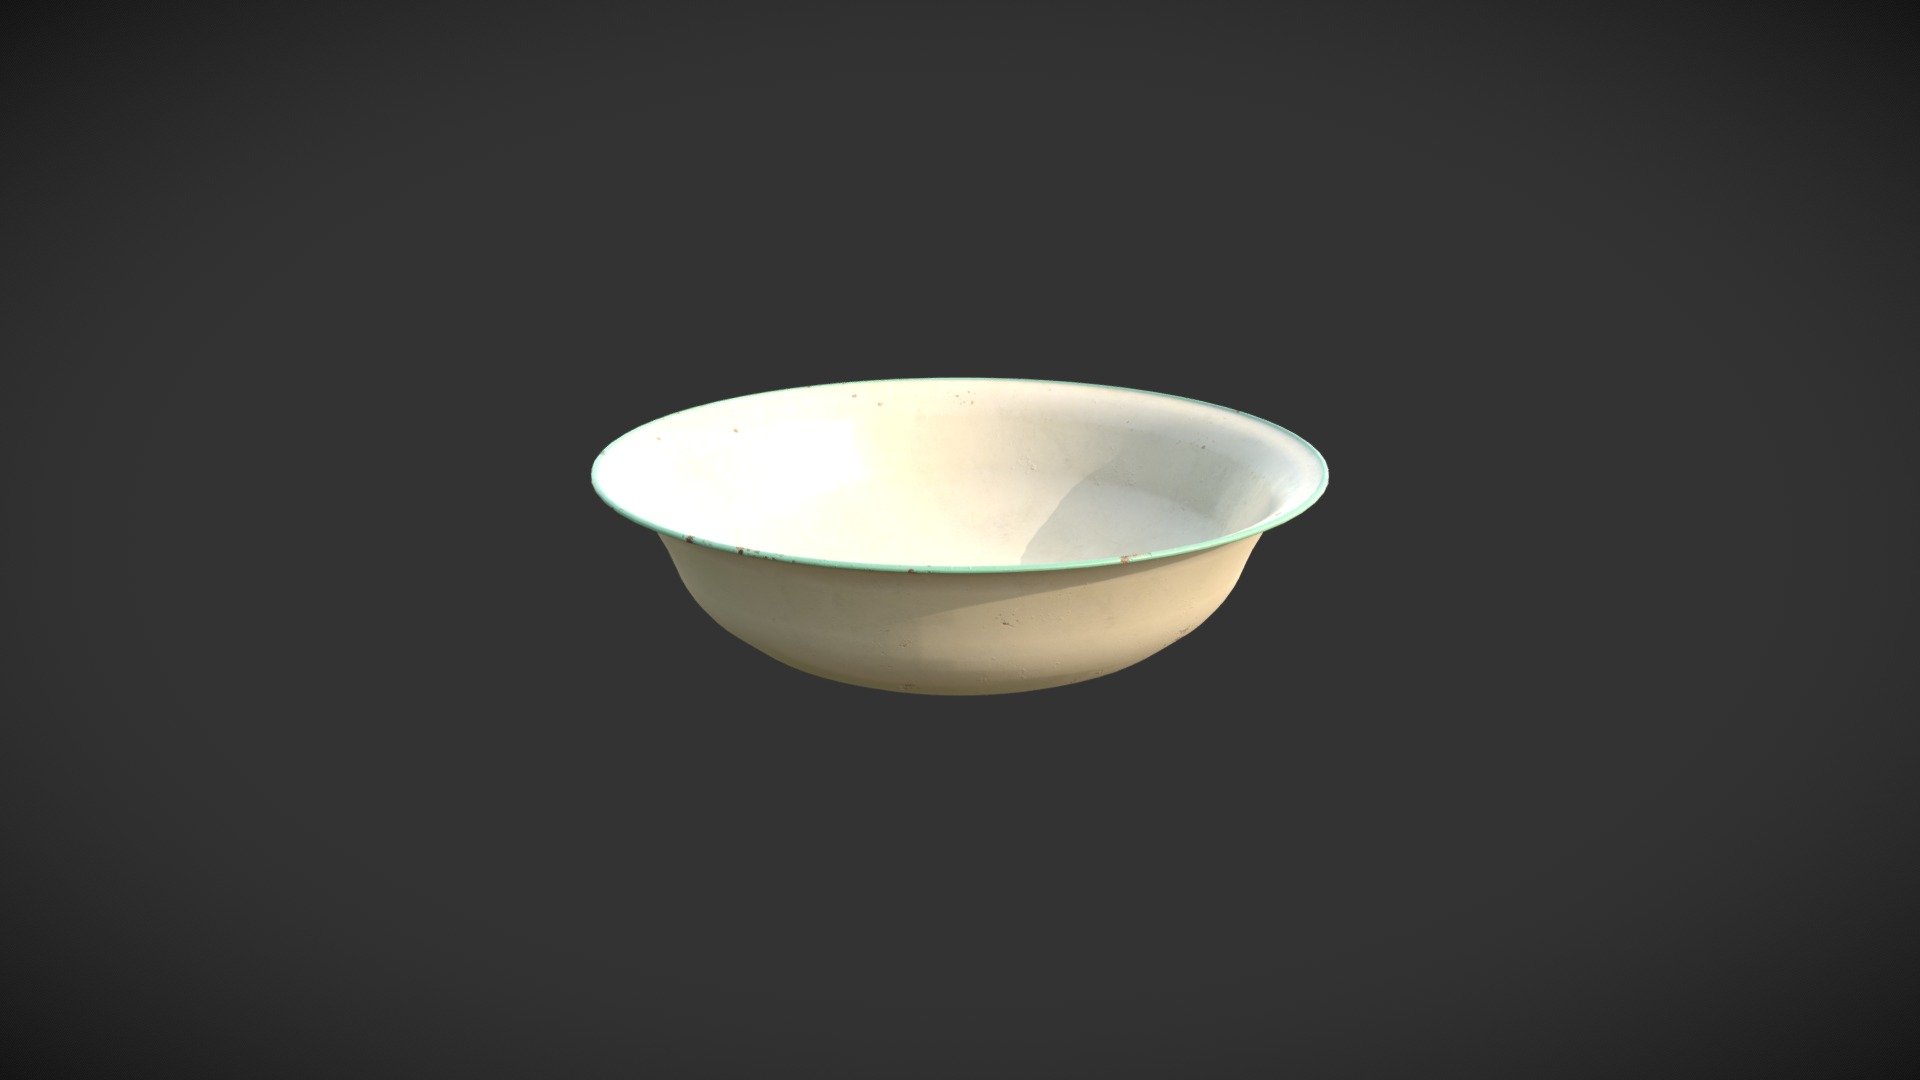 Model of an old and somewhat rusty enameled water bowl with 4K PBR-textures built to real-world scale (metric system).

The water bowl is a classic design inspired by the old enameled products of the Kockums brand, especially the yellow series with green edges that were produced from the 1930s to the 1970s. Bowls such as this one could be found in both private houses and hotels, and were among many other things used for cleaning and personal hygiene in places where running water was not readily available.

The model was created using Blender and Substance Painter. The model is UV-mapped and has a single material.

The zip-file “Rusty water bowl.zip” contains all the textures as png-files (8 bits), as well as the model in the following file formats:

Autodesk FBX 3.9.1 (.fbx)

OBJ 2.3.6 (.obj &amp; .mtl)

Collada 1.4.1 (.dae) 

Blender v2.79 (.blend) - Rusty water bowl - Buy Royalty Free 3D model by Vertex-Design 3d model